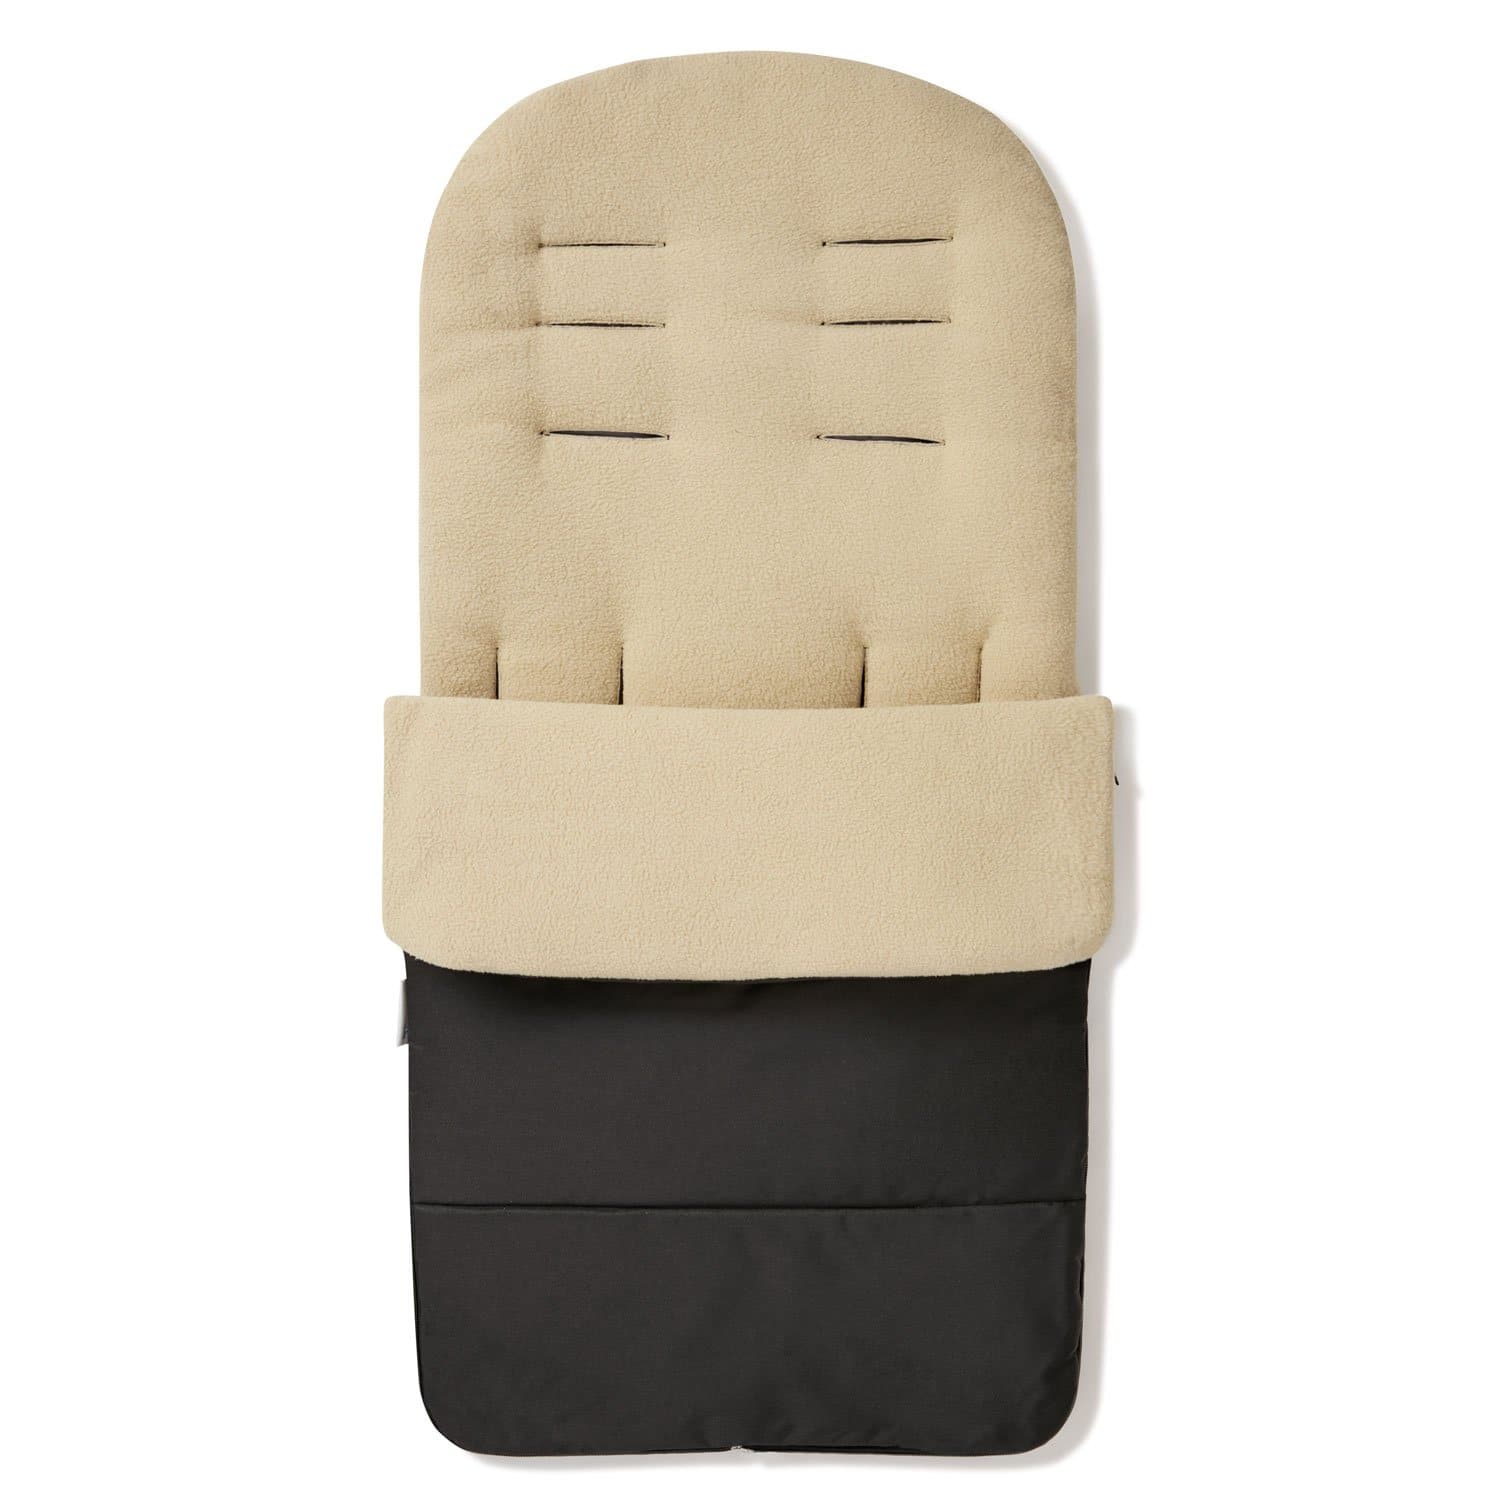 Premium Footmuff / Cosy Toes Compatible with Diono - Desert Sand / Fits All Models | For Your Little One